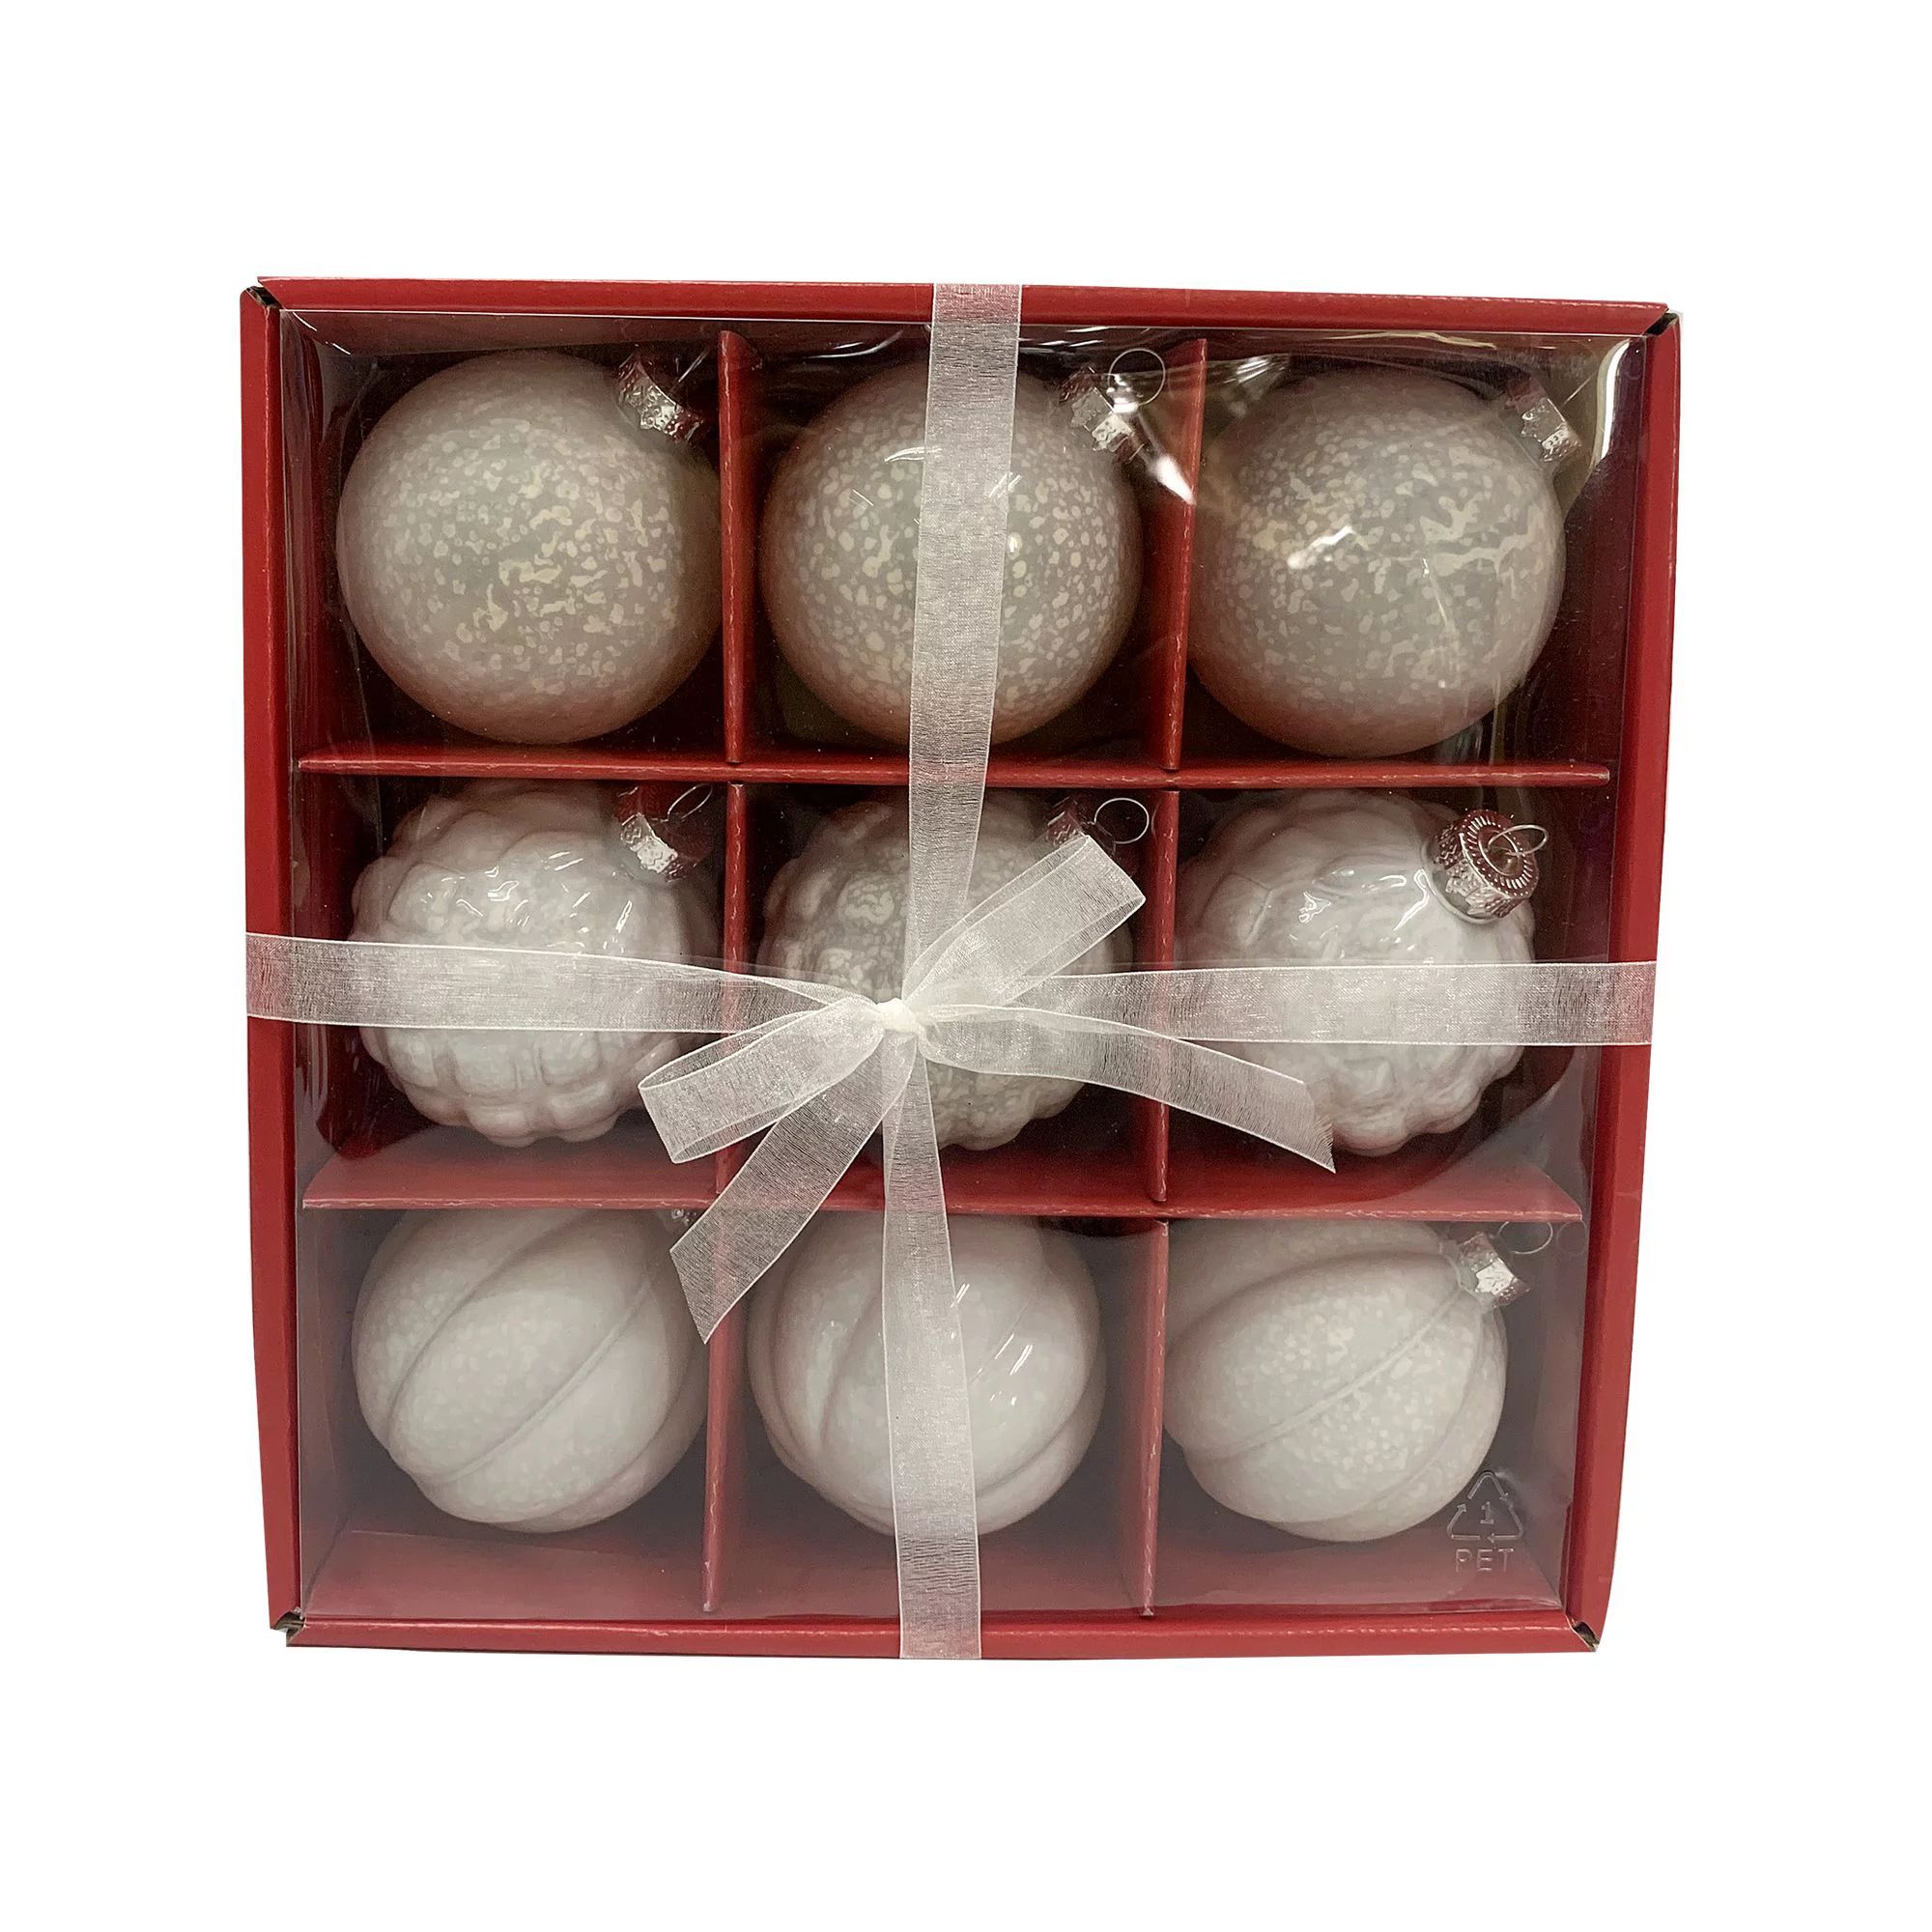 Holiday Time Vintage-Inspired White Glass Christmas Ornaments, 9 Count - Walmart.com | Walmart (US)